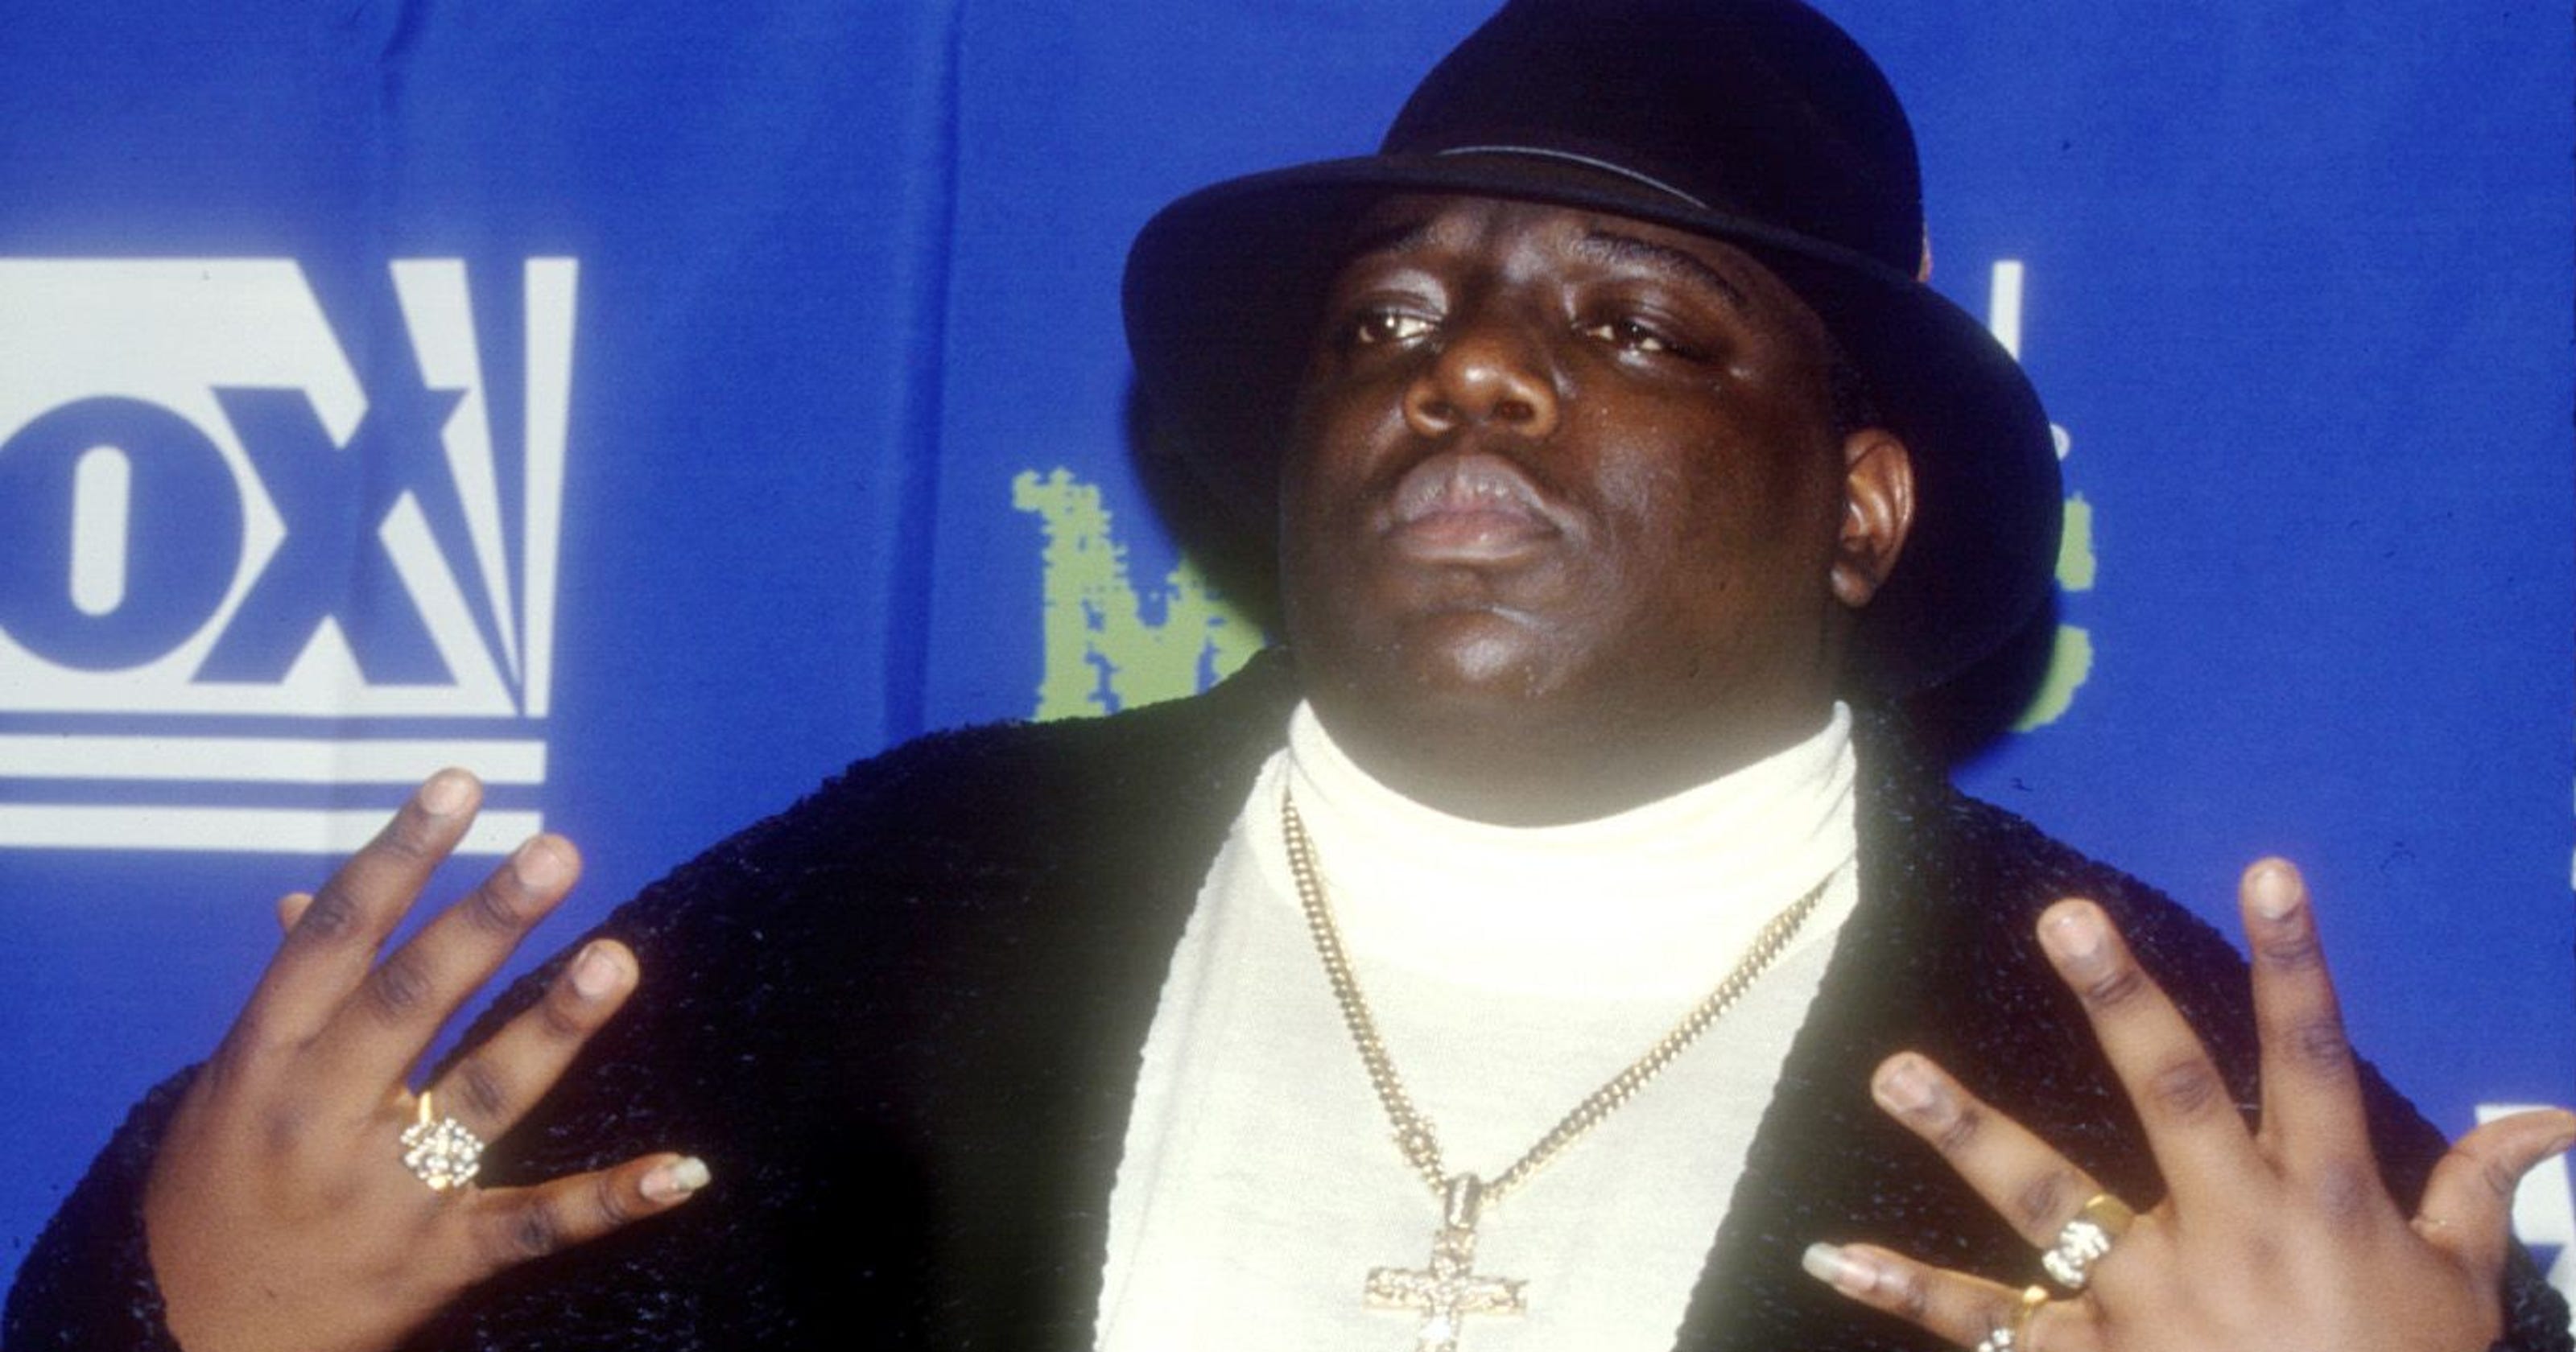 Best Tributes To Notorious Big Aka Biggie Smalls On The 20th